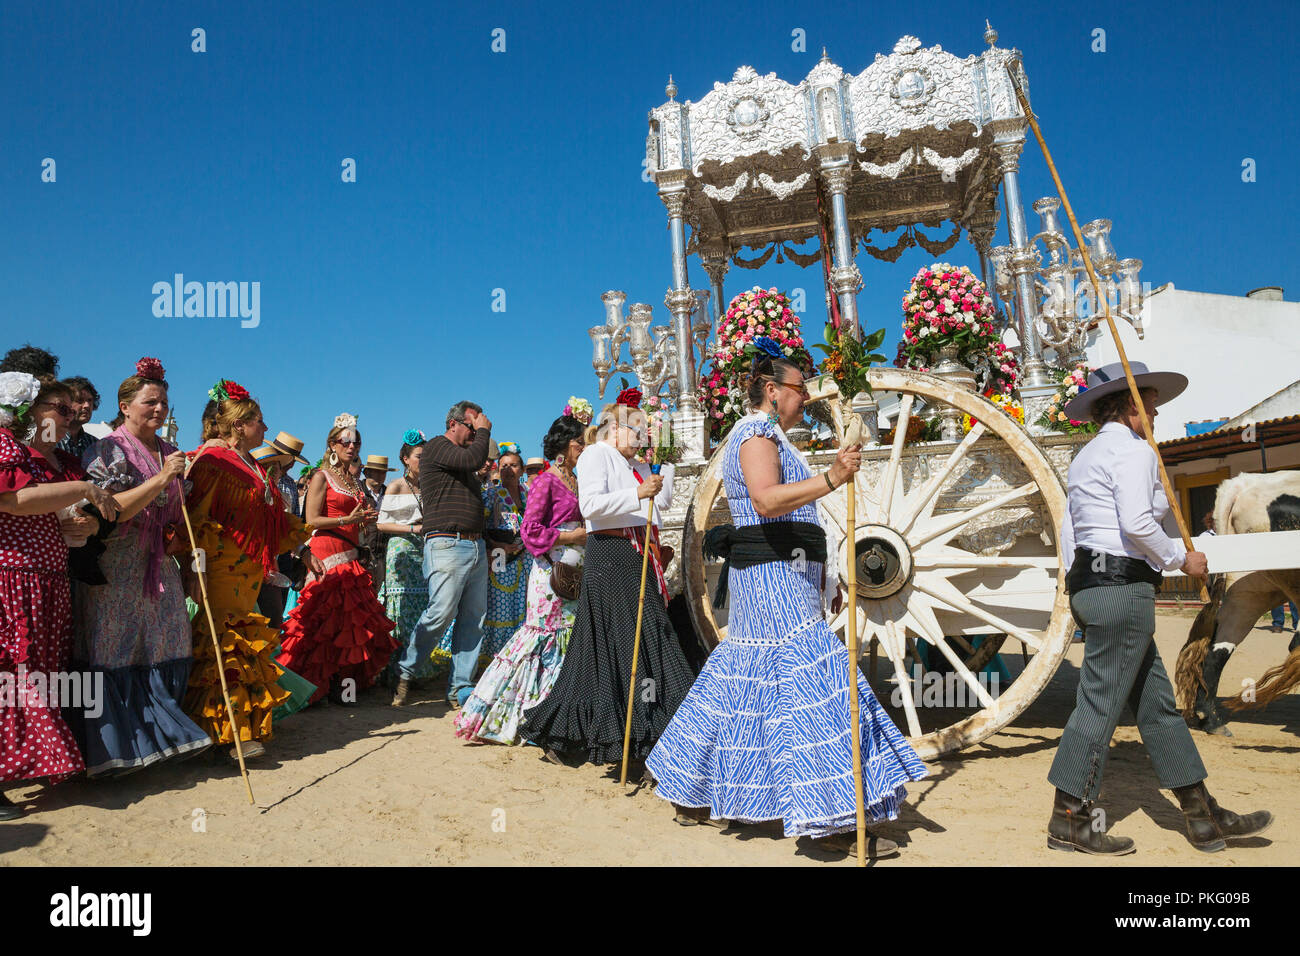 People in traditional clothes and decorated oxcarts, Pentecost pilgrimage of El Rocio, Huelva province, Andalusia, Spain Stock Photo